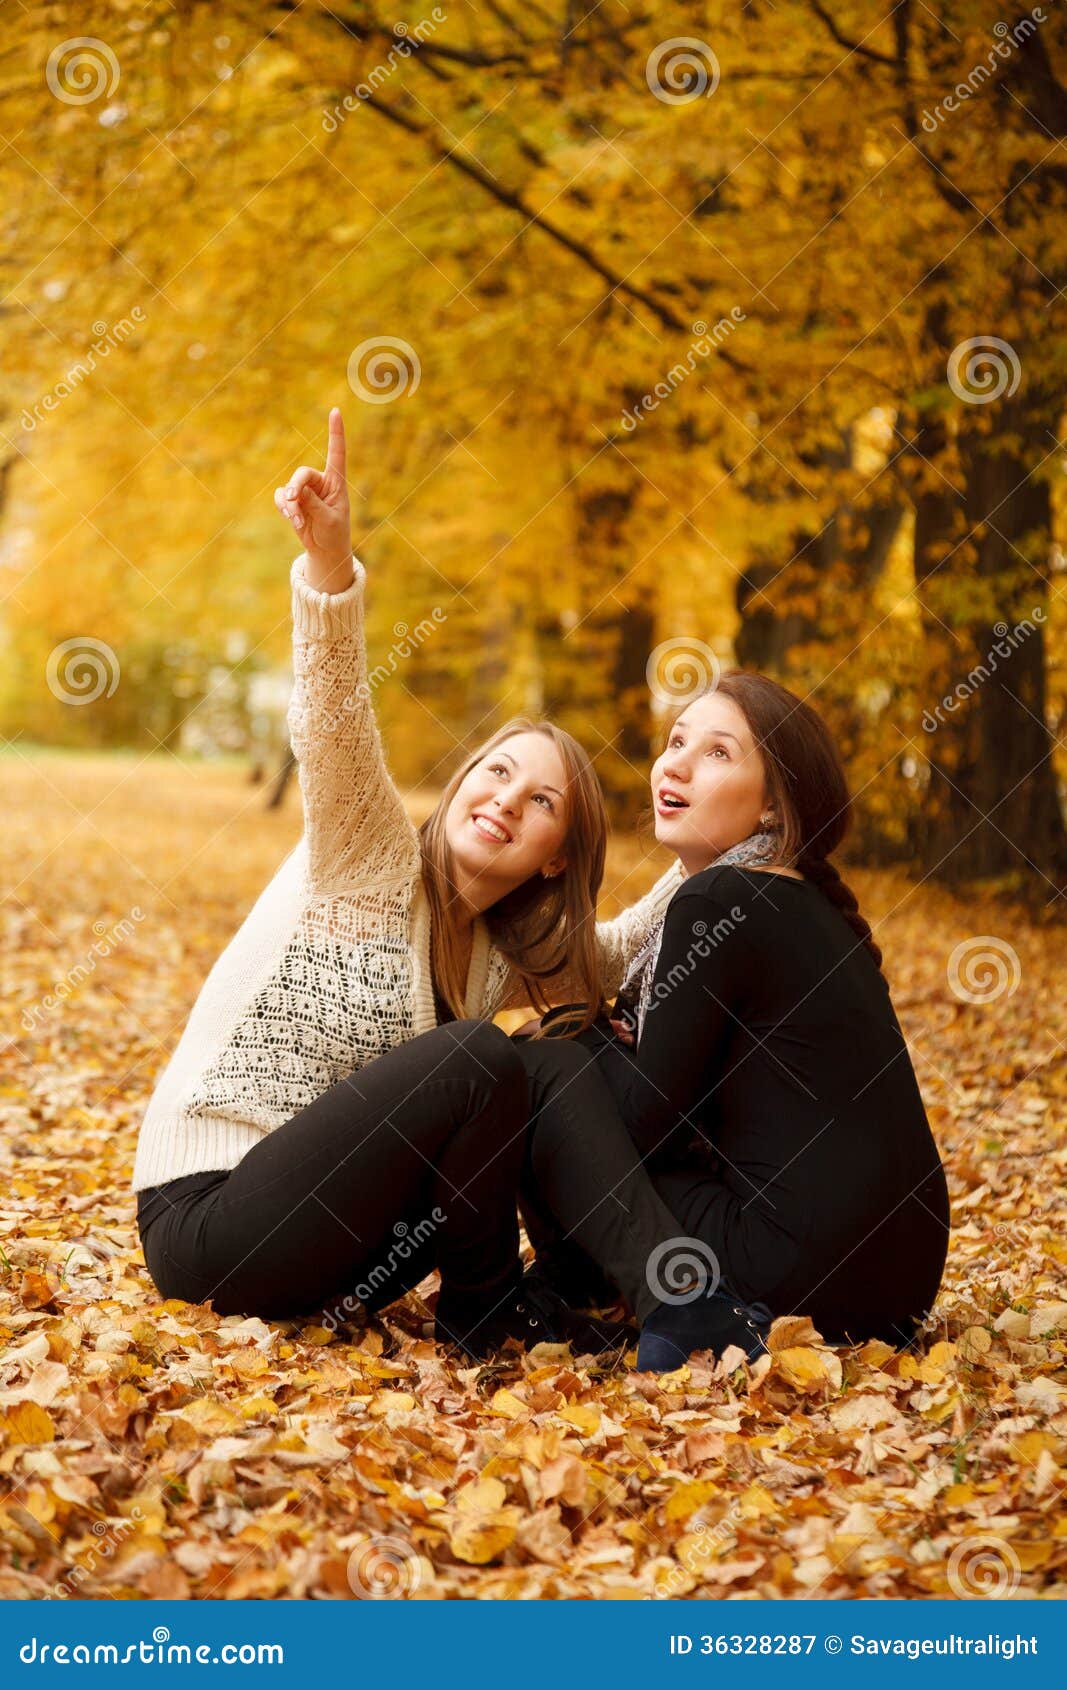 Two young females outdoors stock image. Image of pointing - 36328287